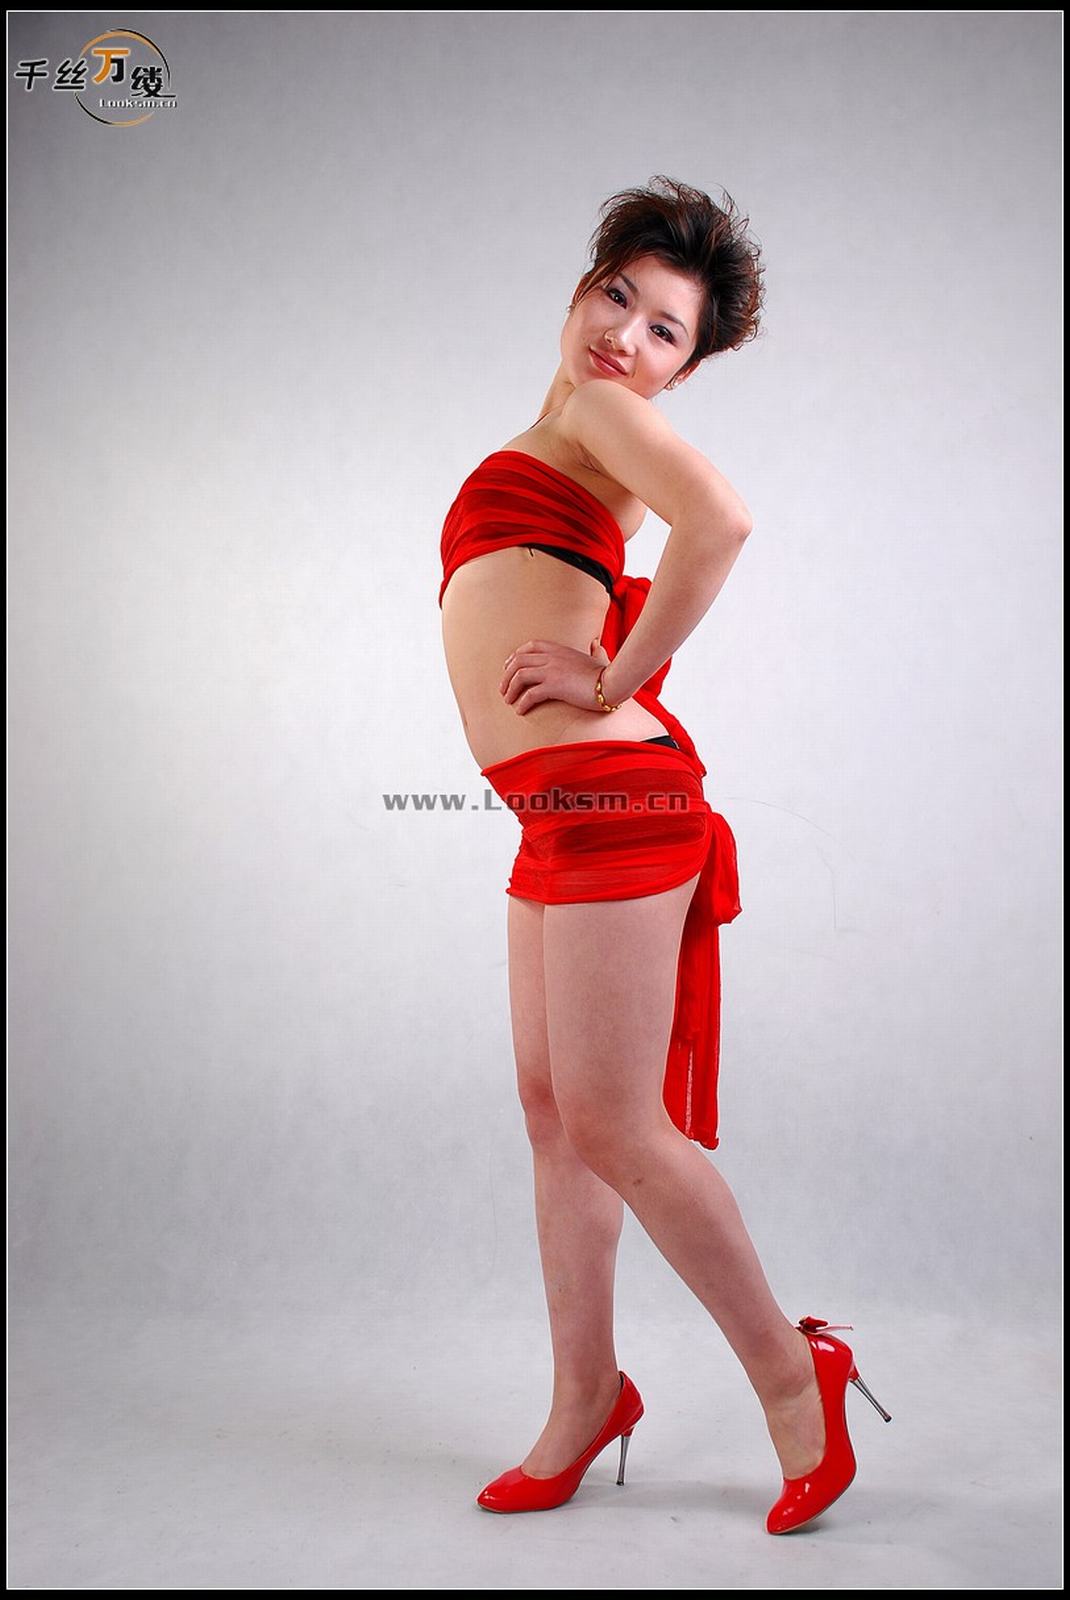 Chinese Rope Model 236